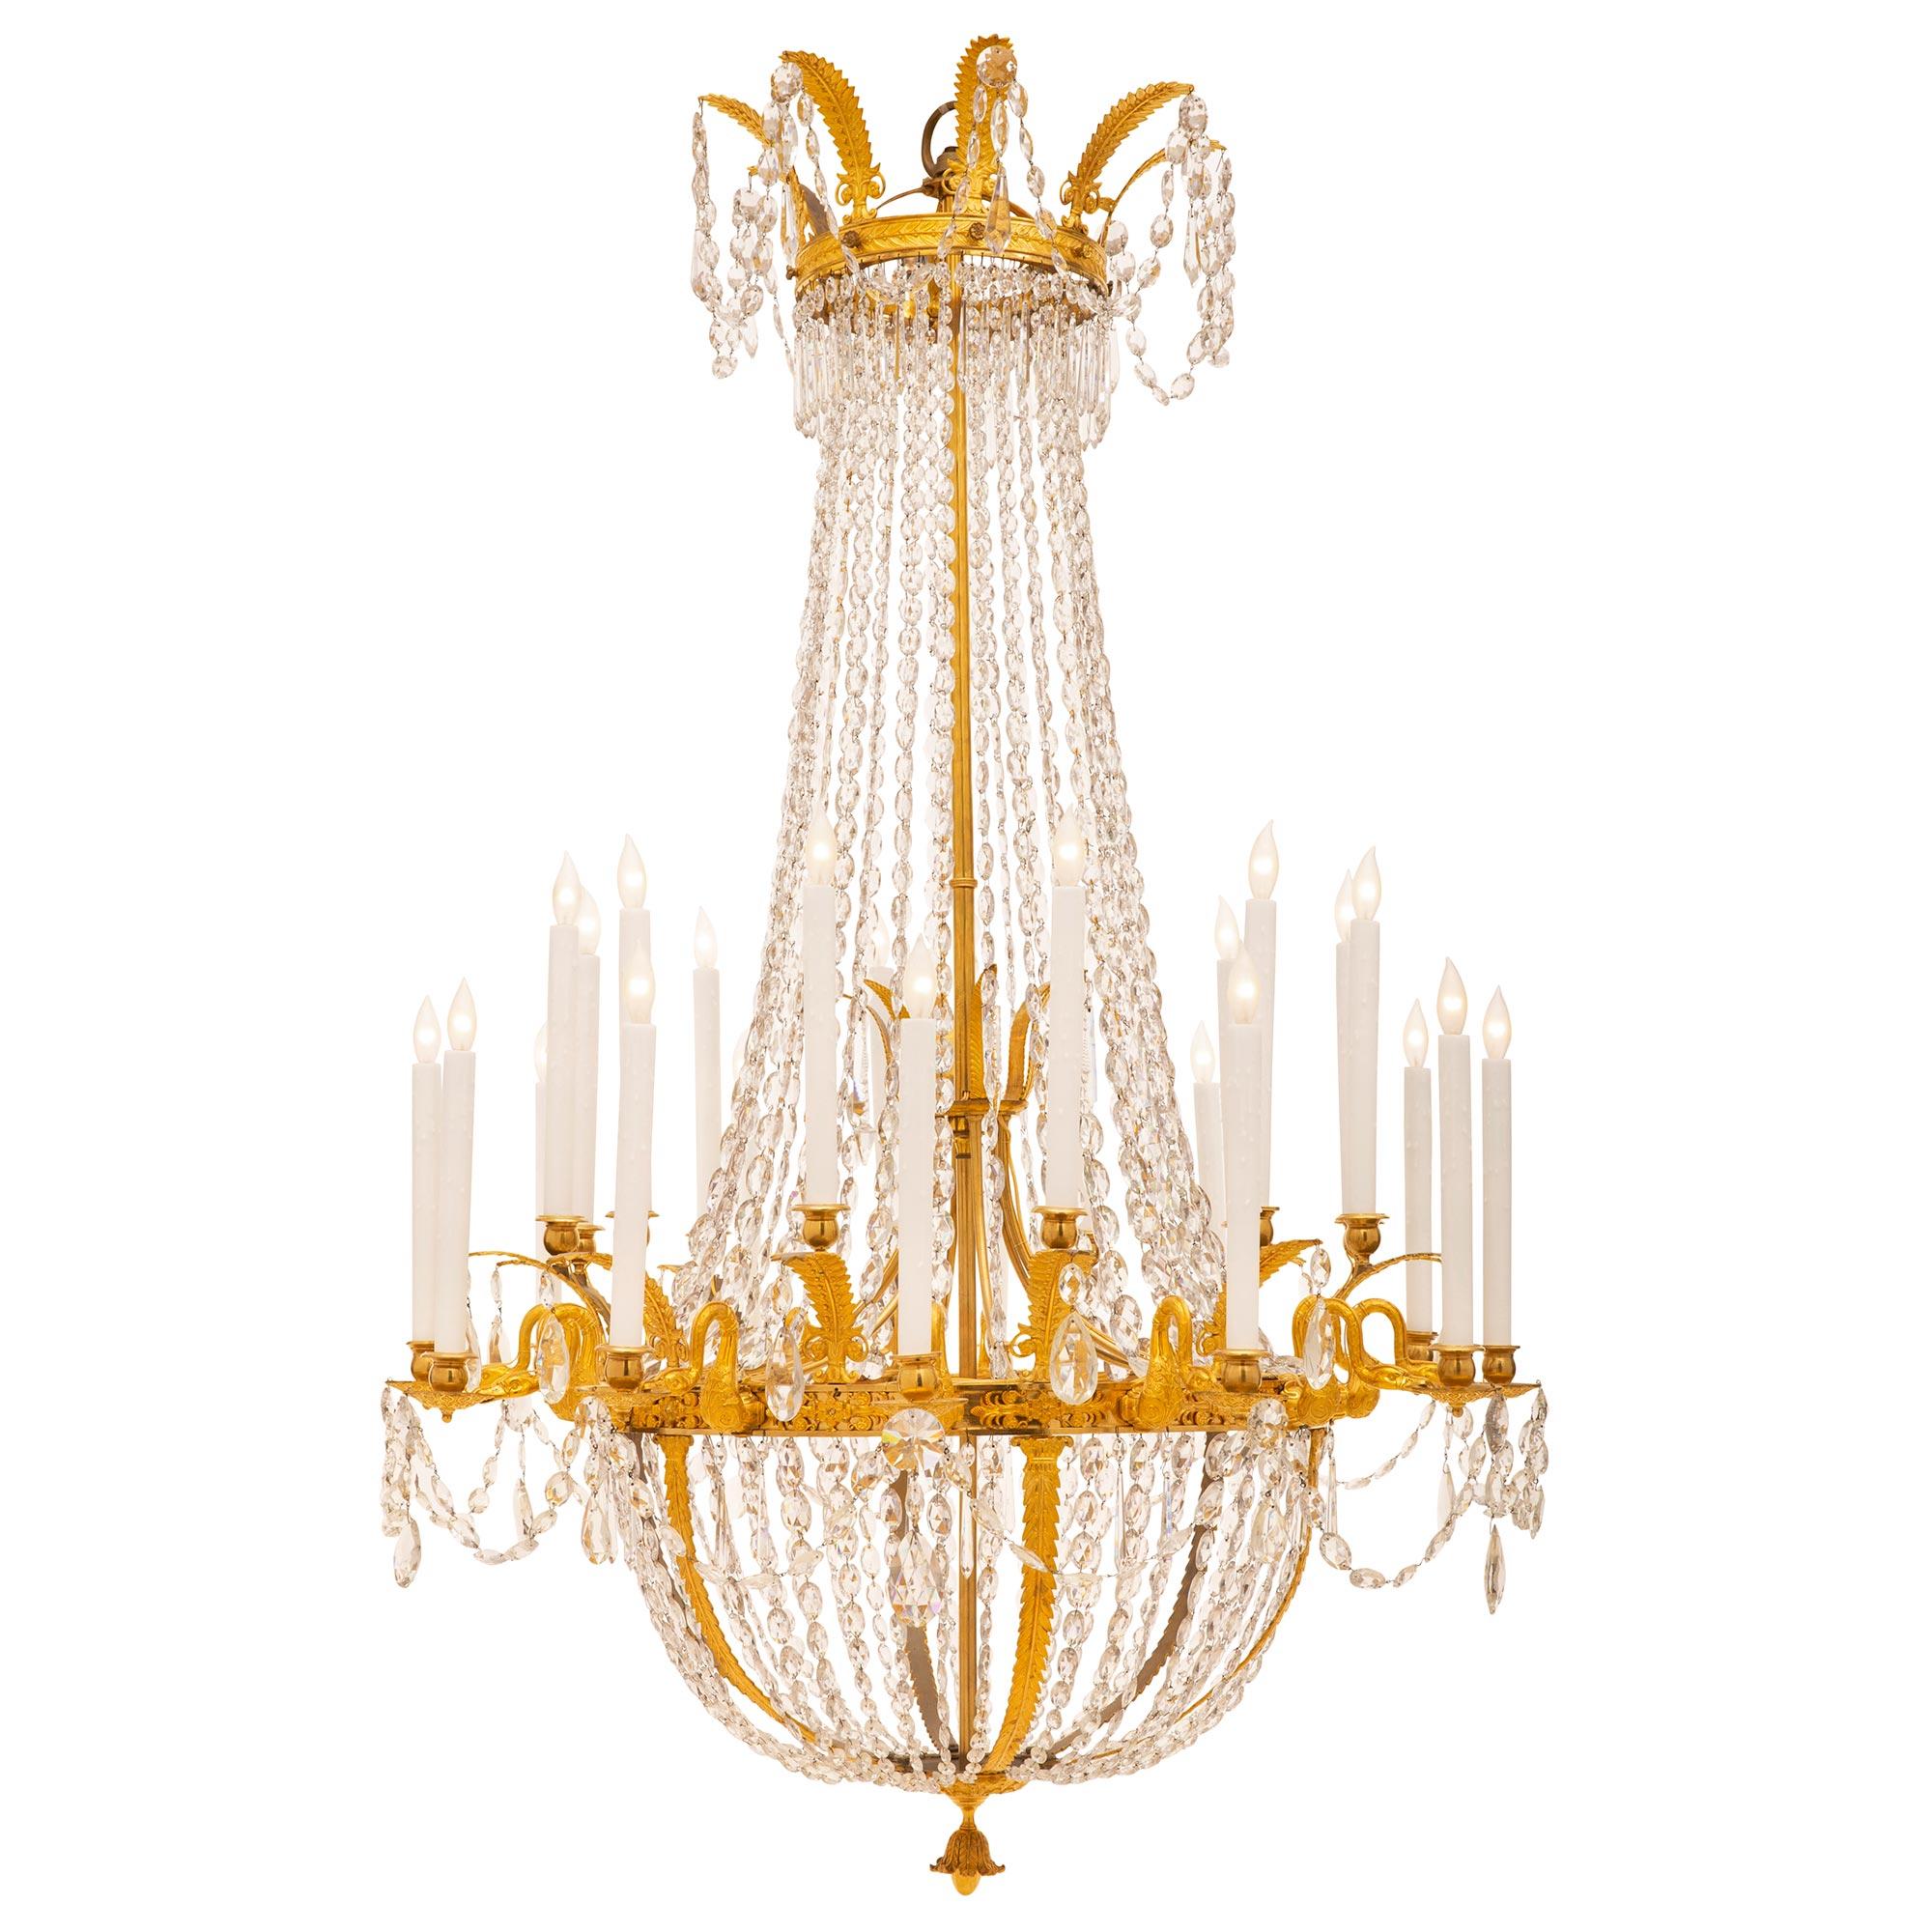 French 19th Century First Empire Period Ormolu and Crystal Chandelier In Good Condition For Sale In West Palm Beach, FL